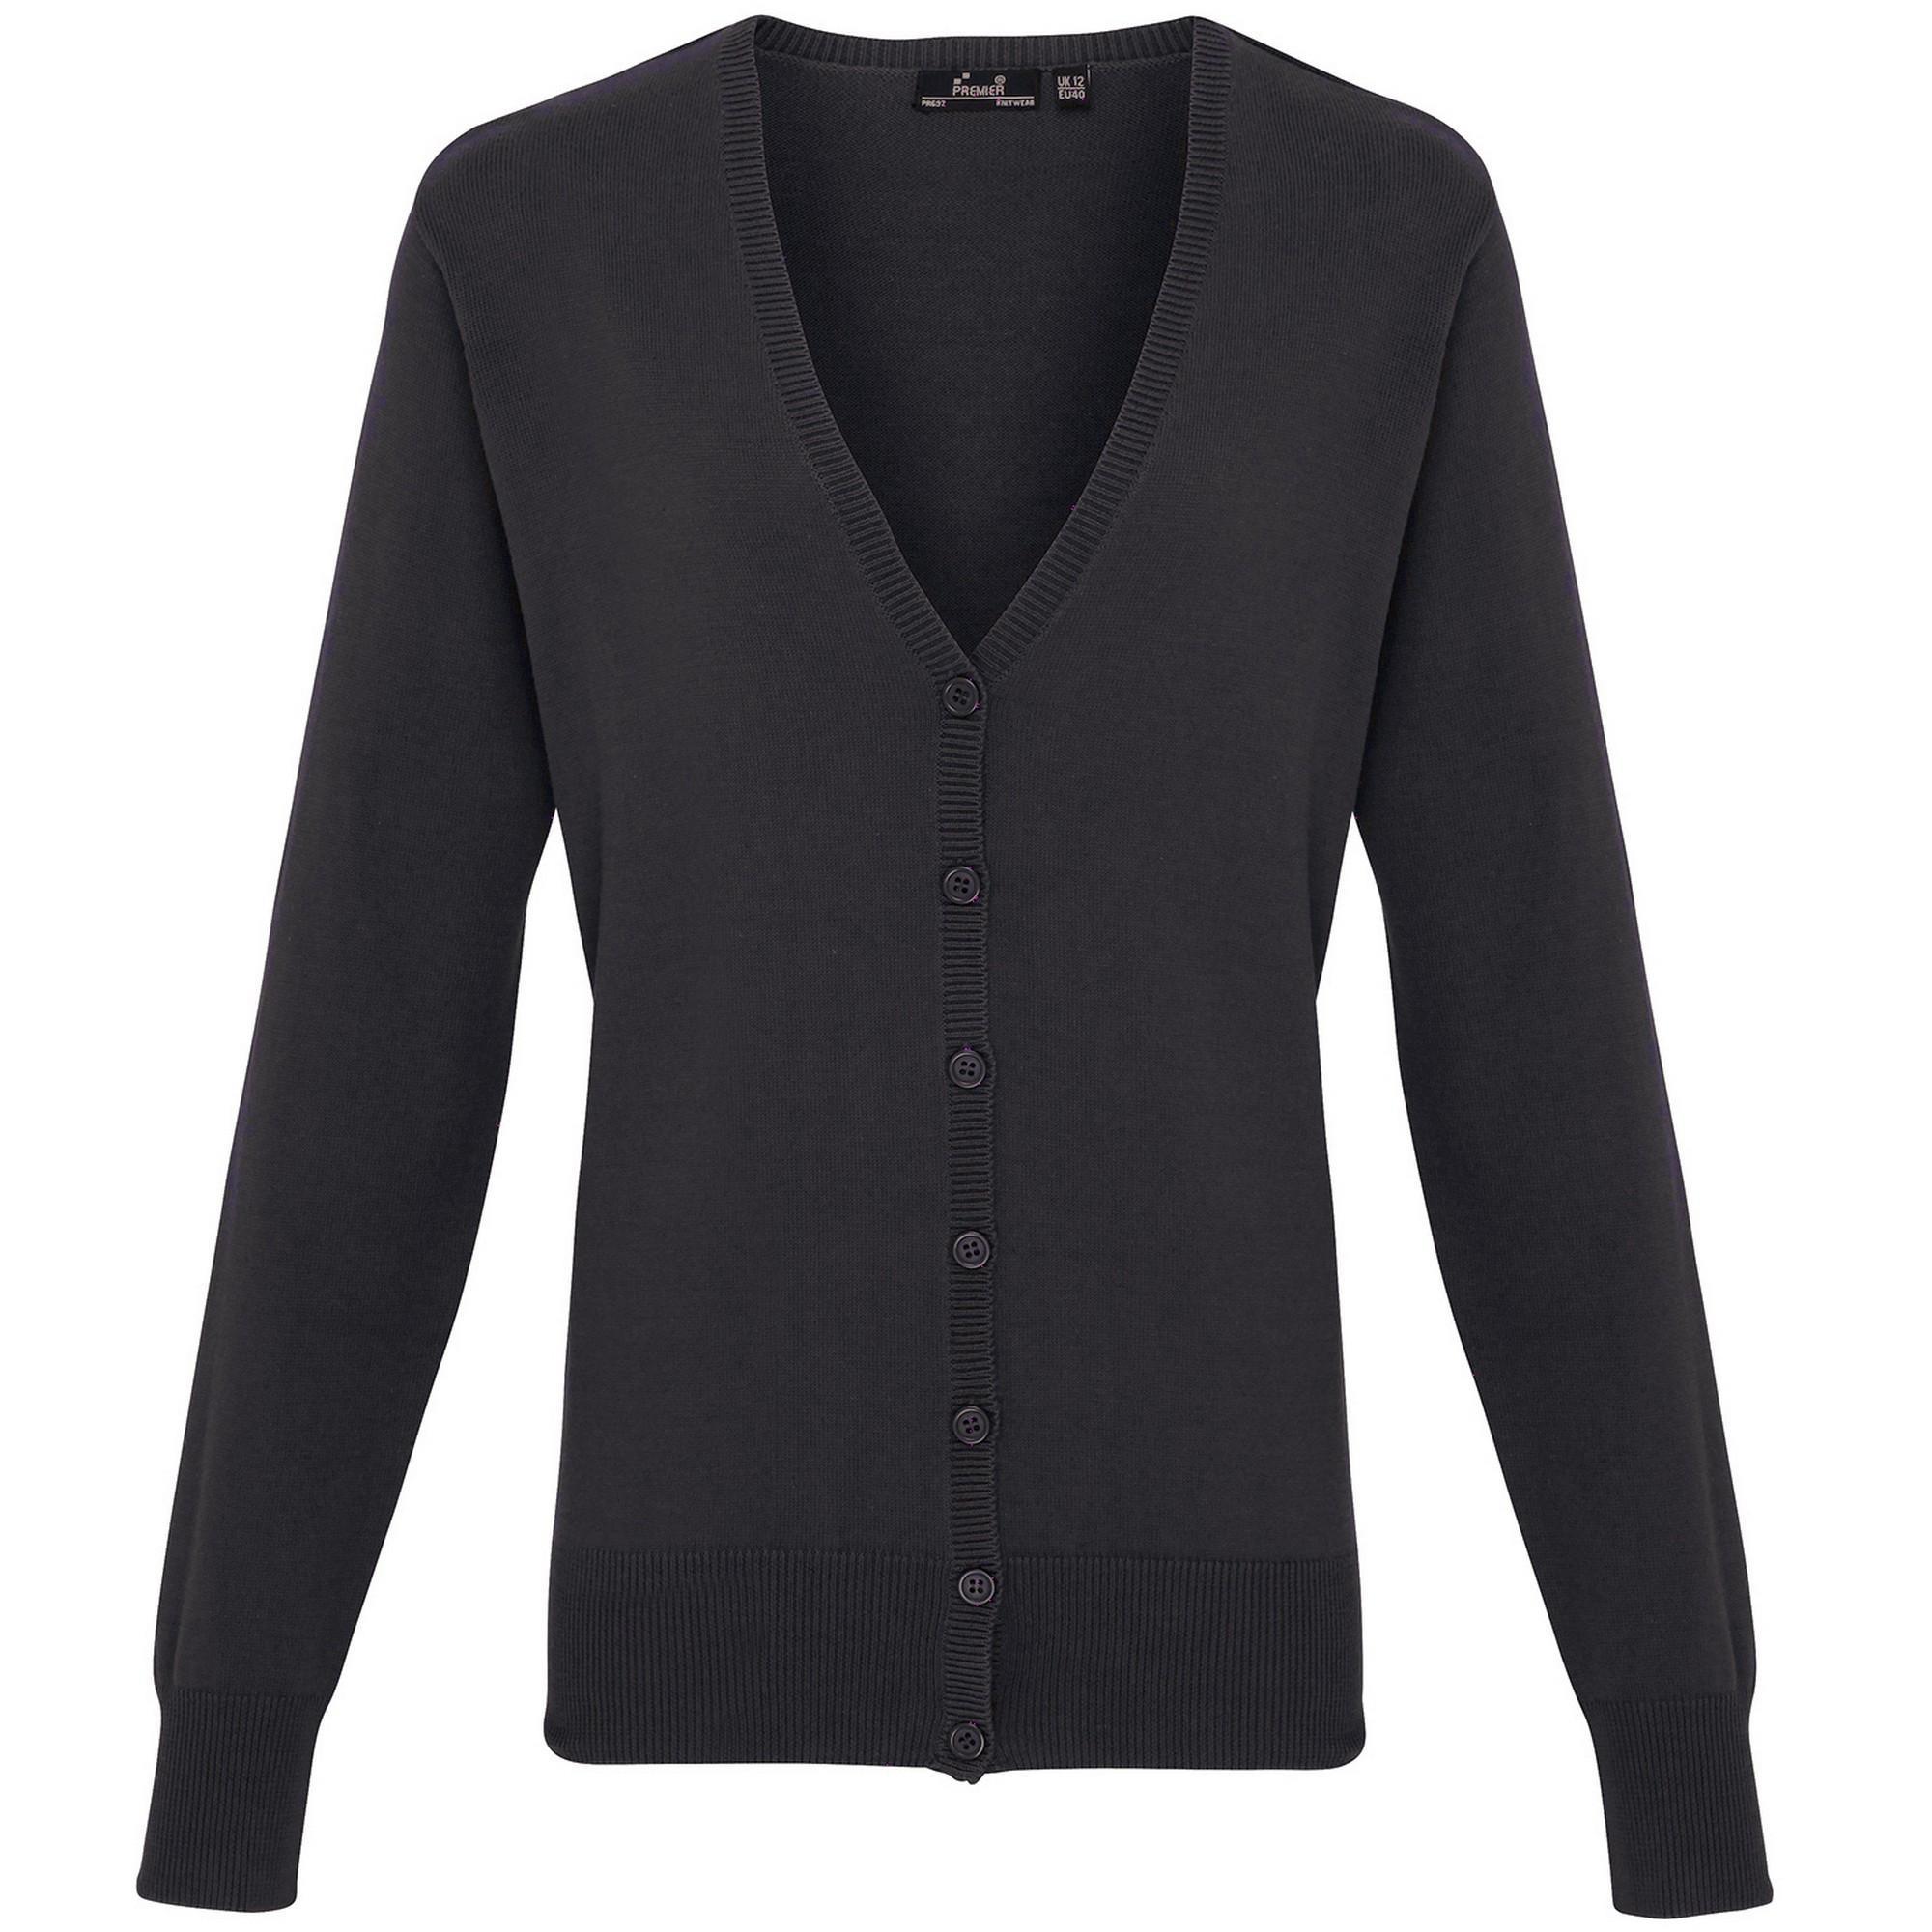 Premier Womens/Ladies Button Through Long Sleeve V-neck Knitted Cardigan (Charcoal) (16)